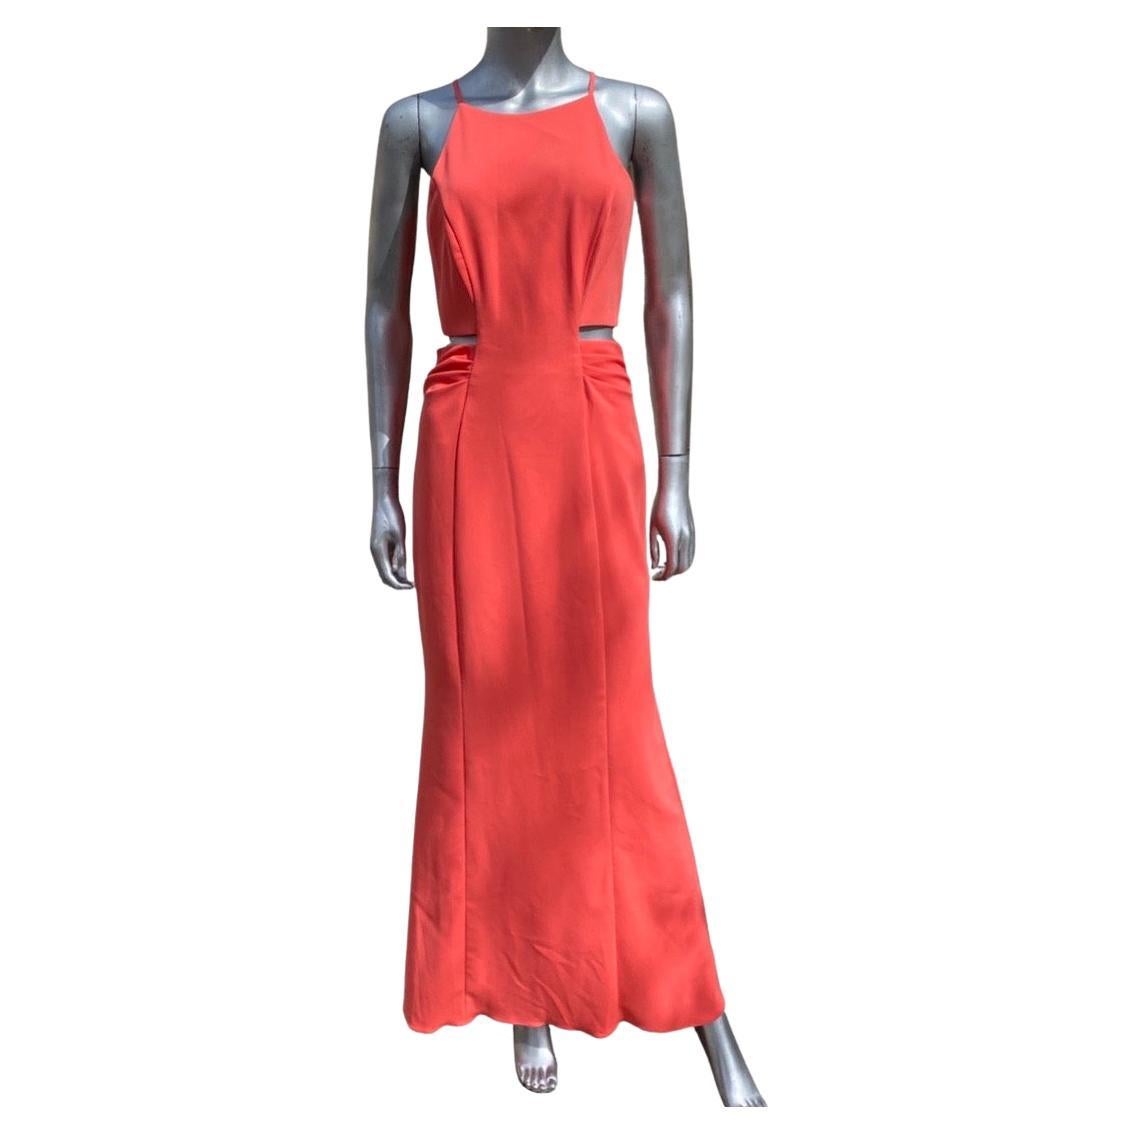 A sexy slither of a dress designed by the team of Badgley Mischka for the collection label. (higher end). Cut-out sides above waist show a hint of skin. Flattering draped sides on waistline. Beautiful coral orange color. Fabric is a imported poly